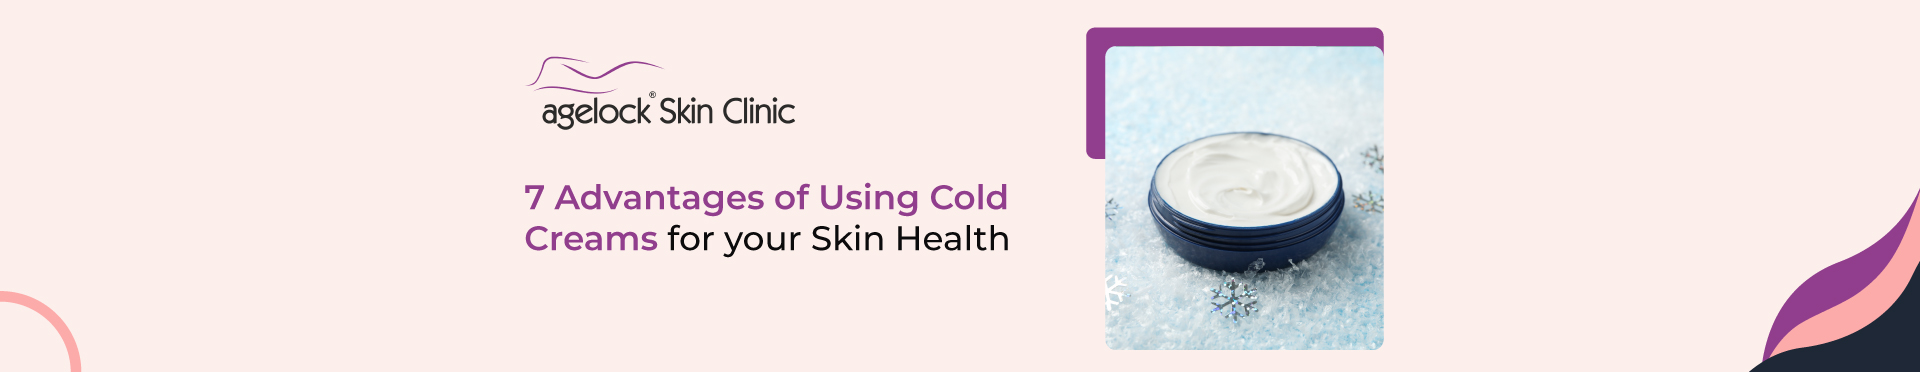 <strong>7 advantages of using cold creams for your skin health</strong>